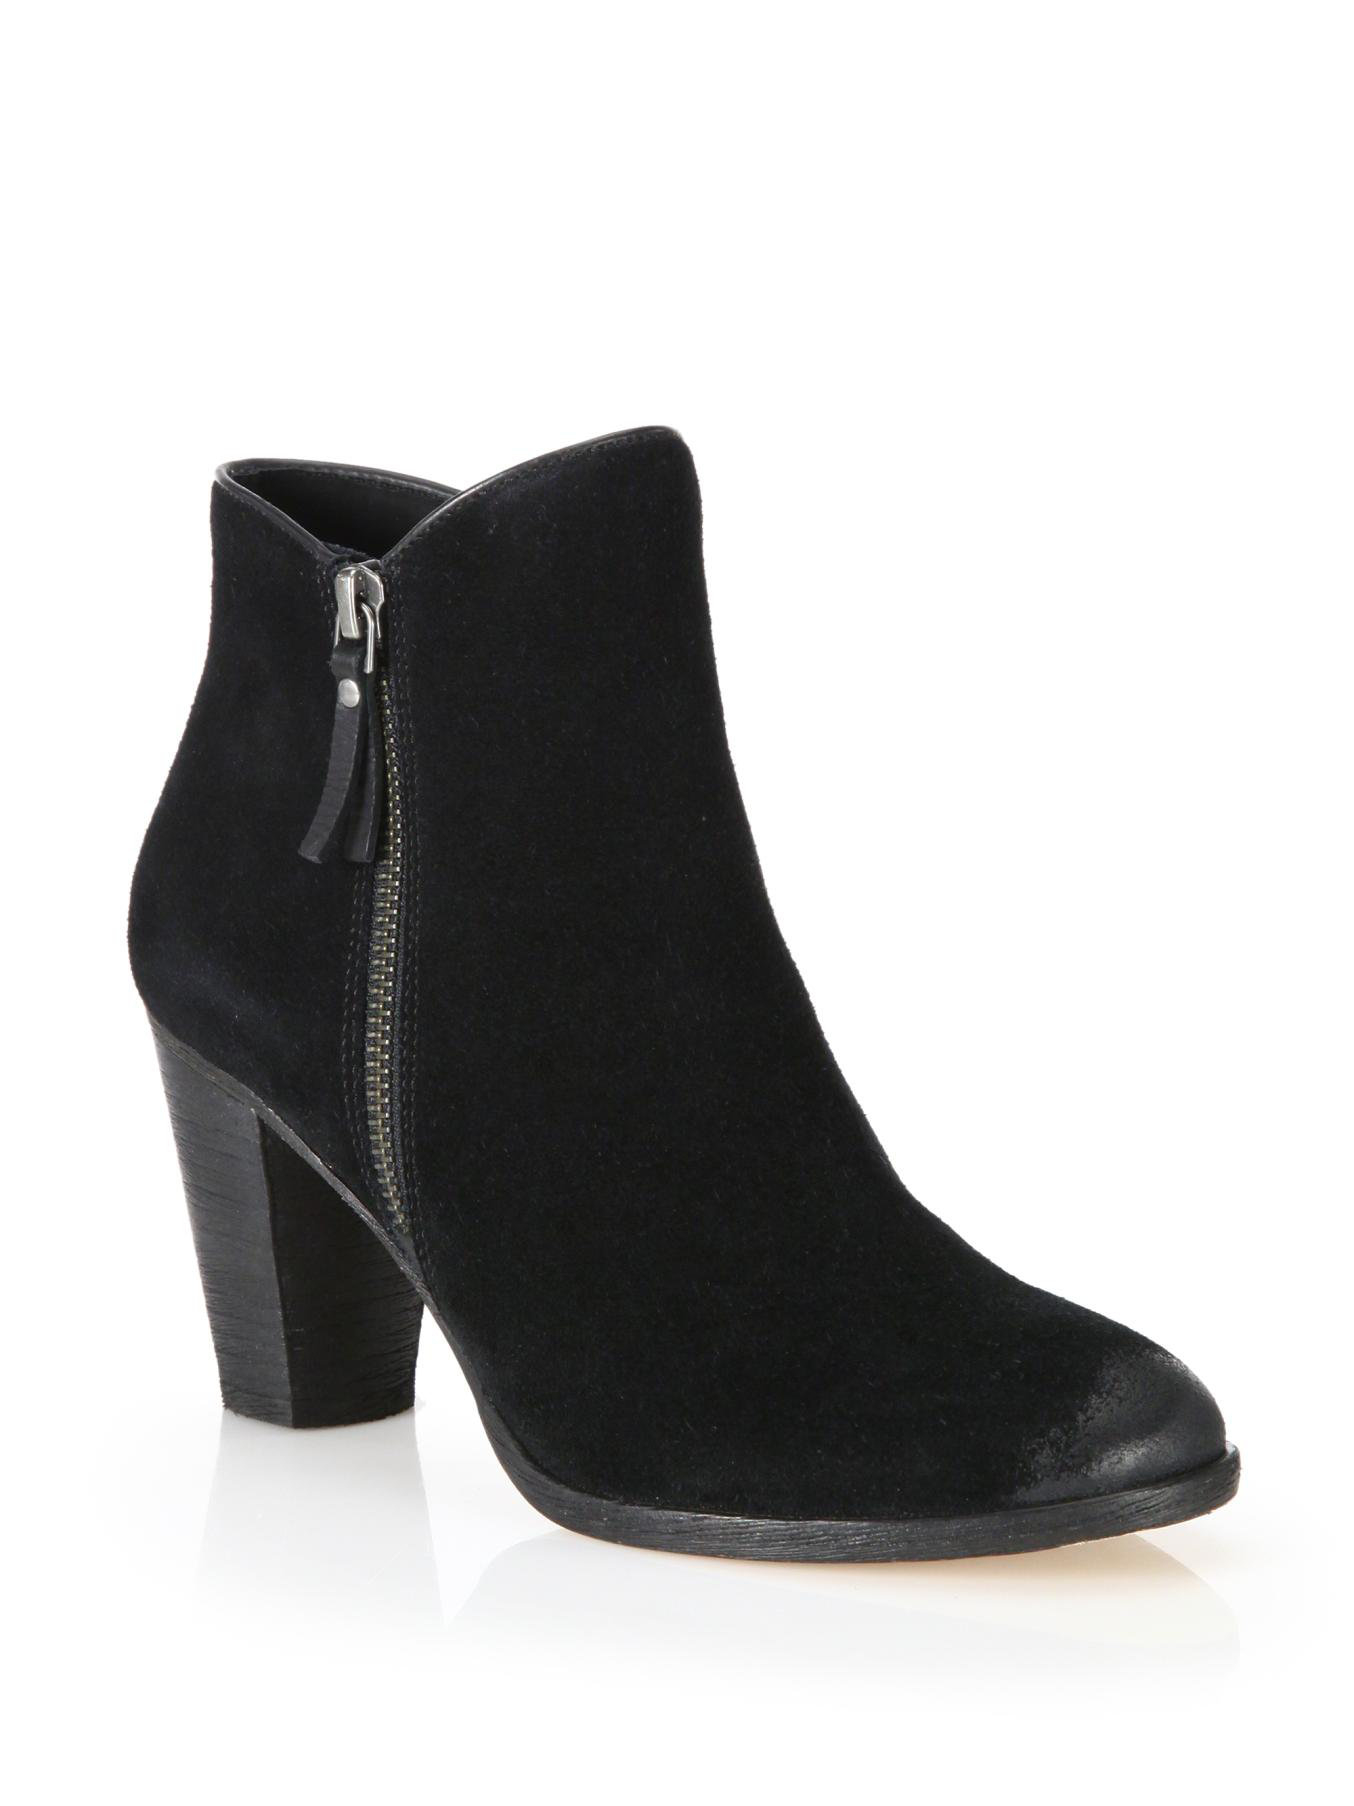 Cole haan Hayes Suede Ankle Boots in Black | Lyst